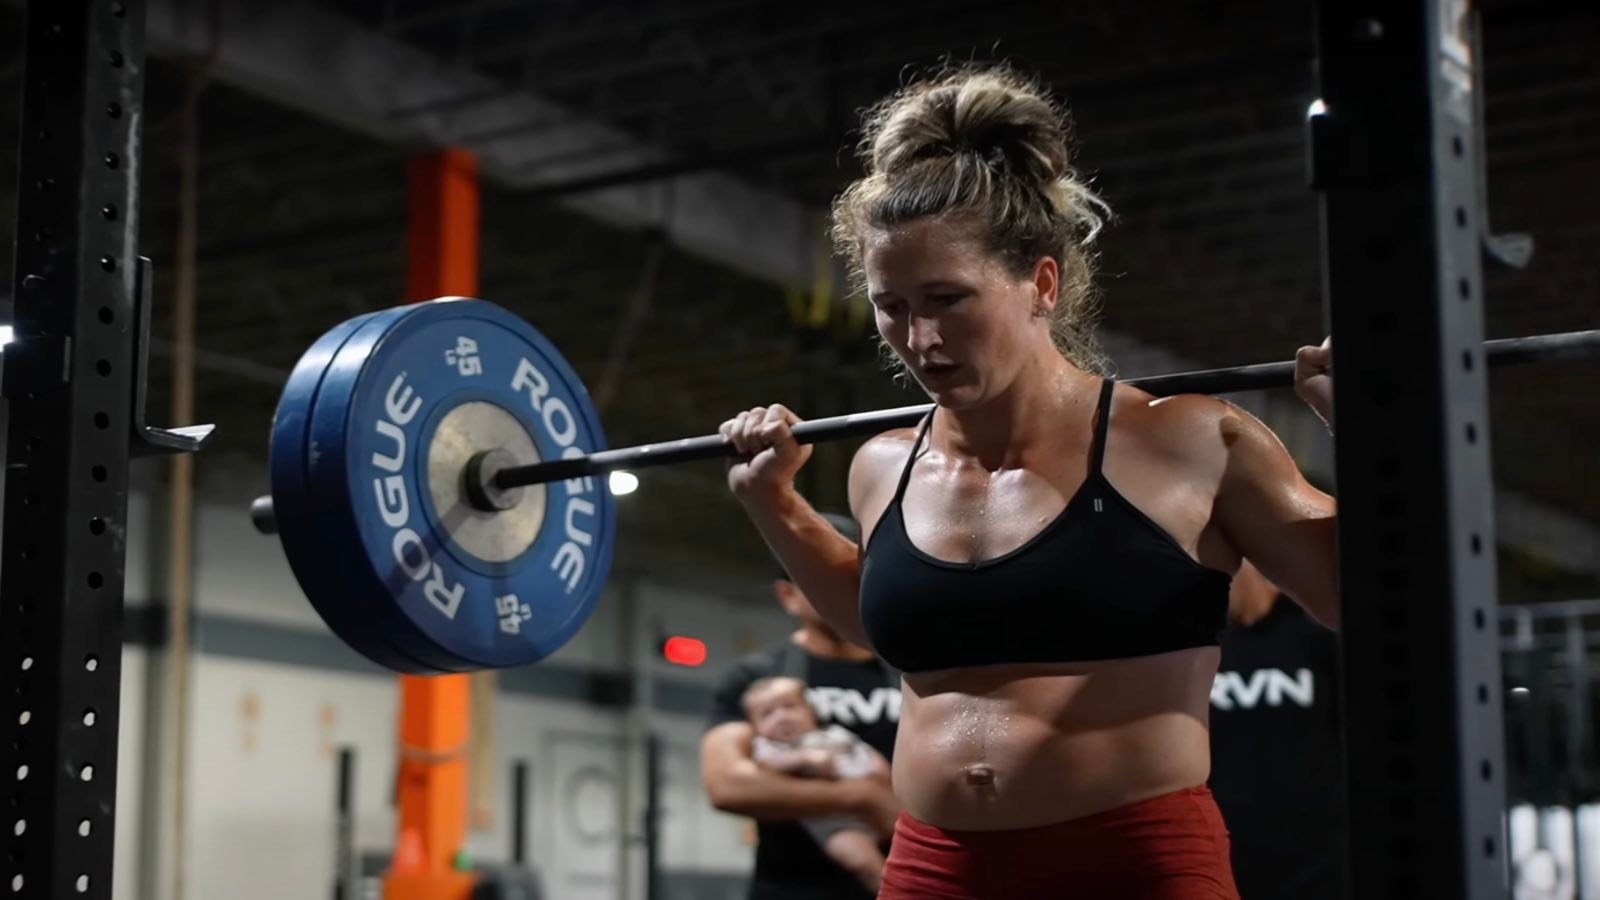 tia-clair-toomey-continues-comeback-with-full-day-of-training-–-breaking-muscle